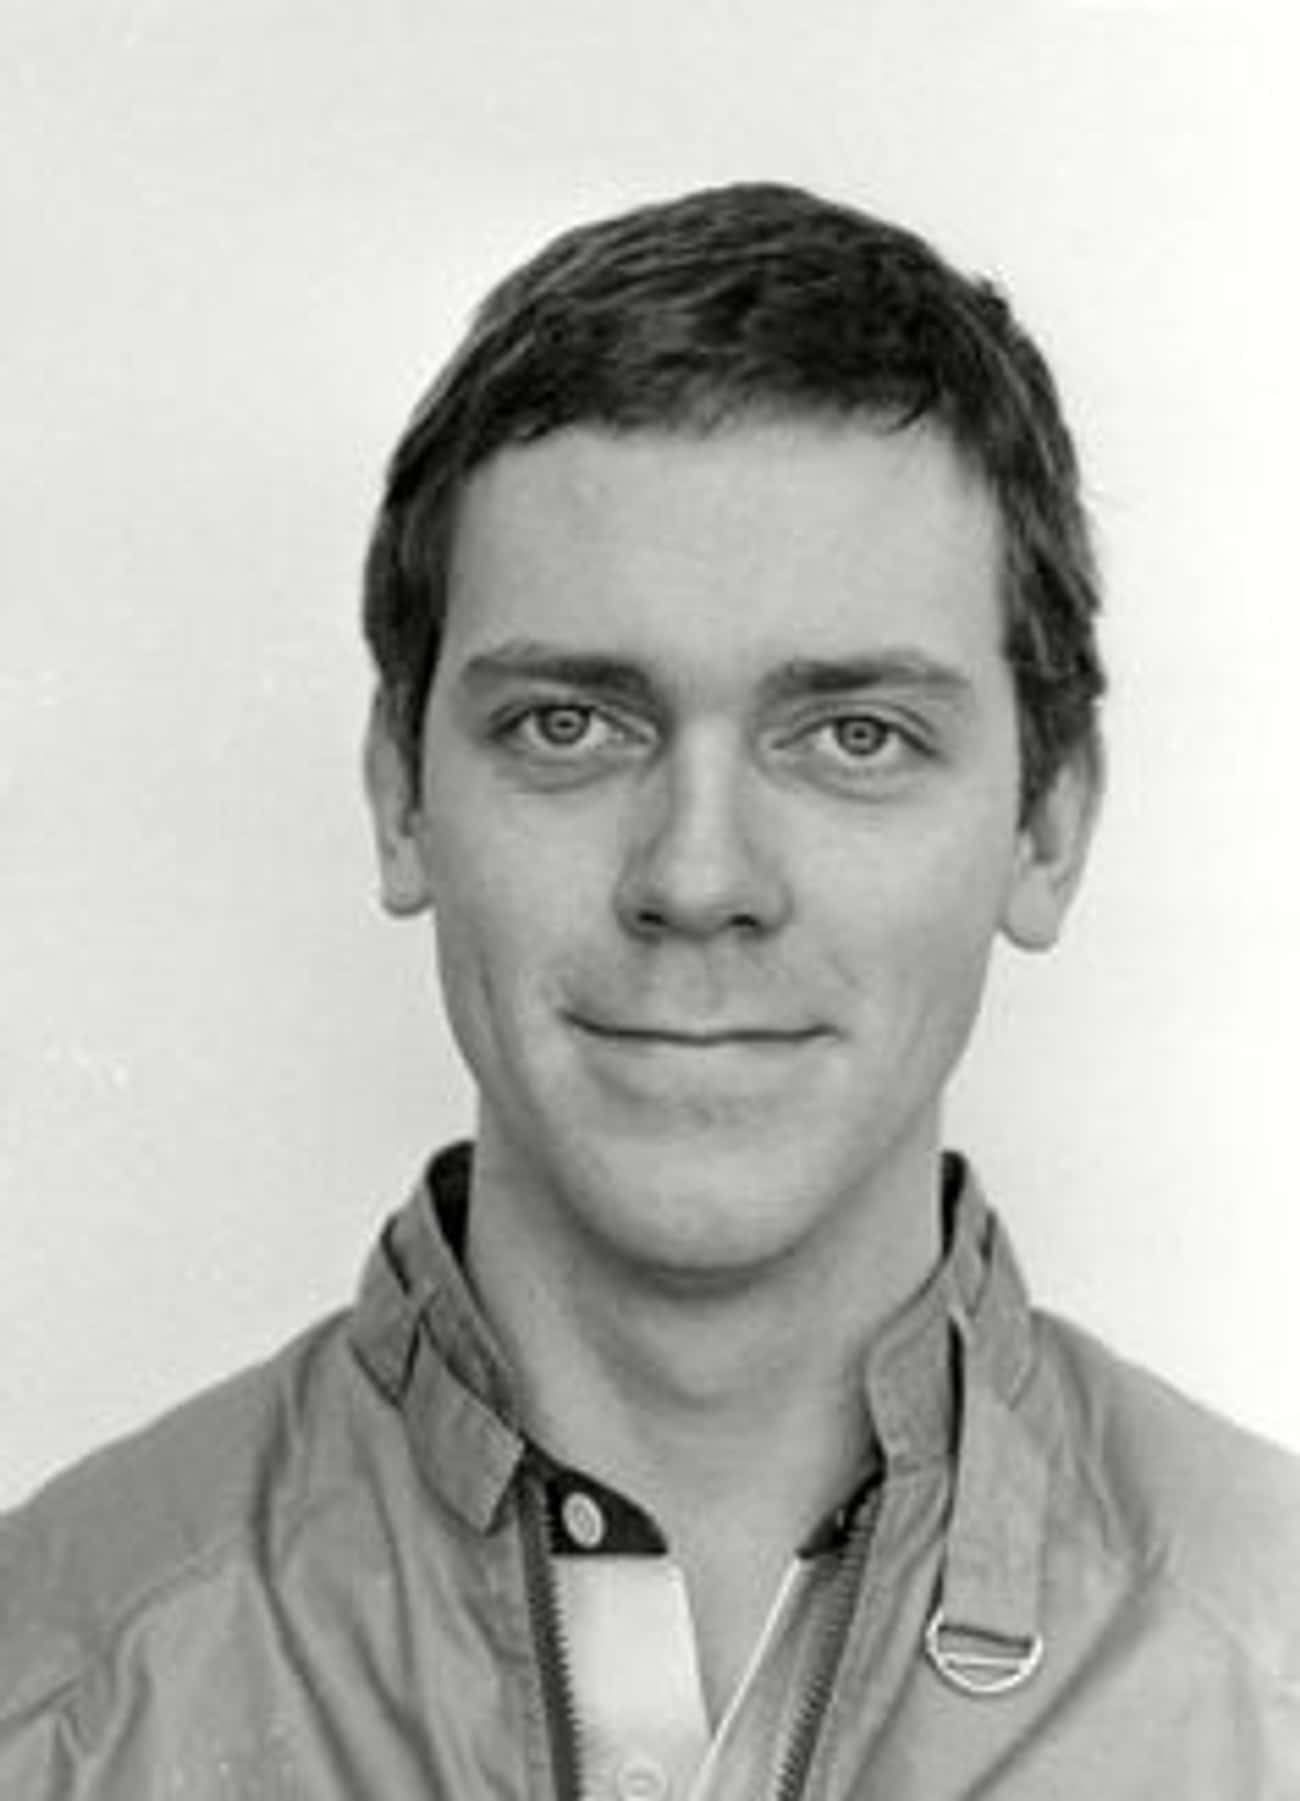 Young Hugh Laurie in Light-Colored Jacket